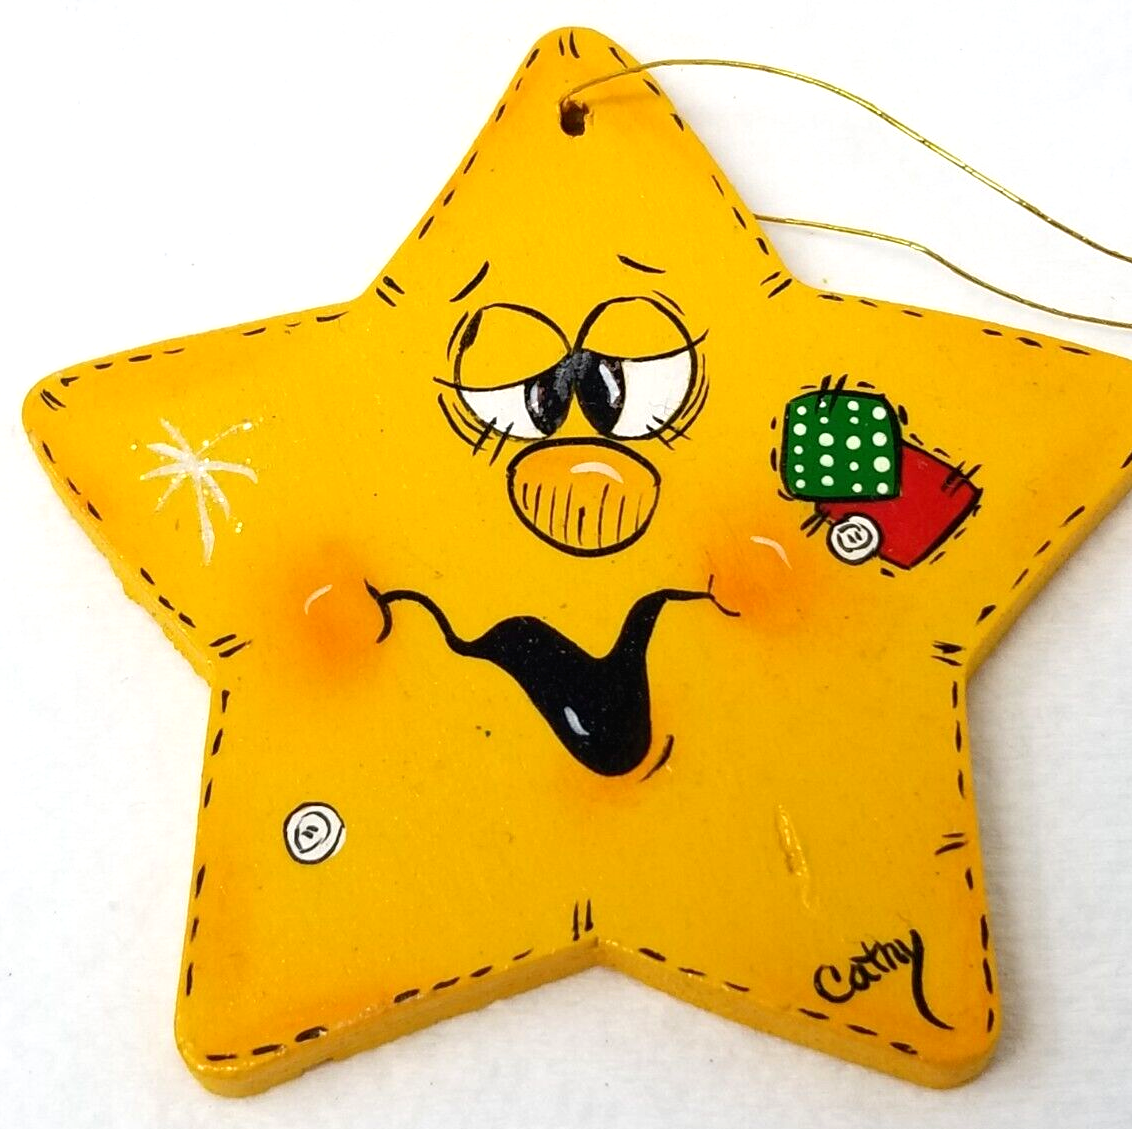 Primary image for Drunk Chubby Star Christmas Ornament Yellow Wood Cathy Vintage